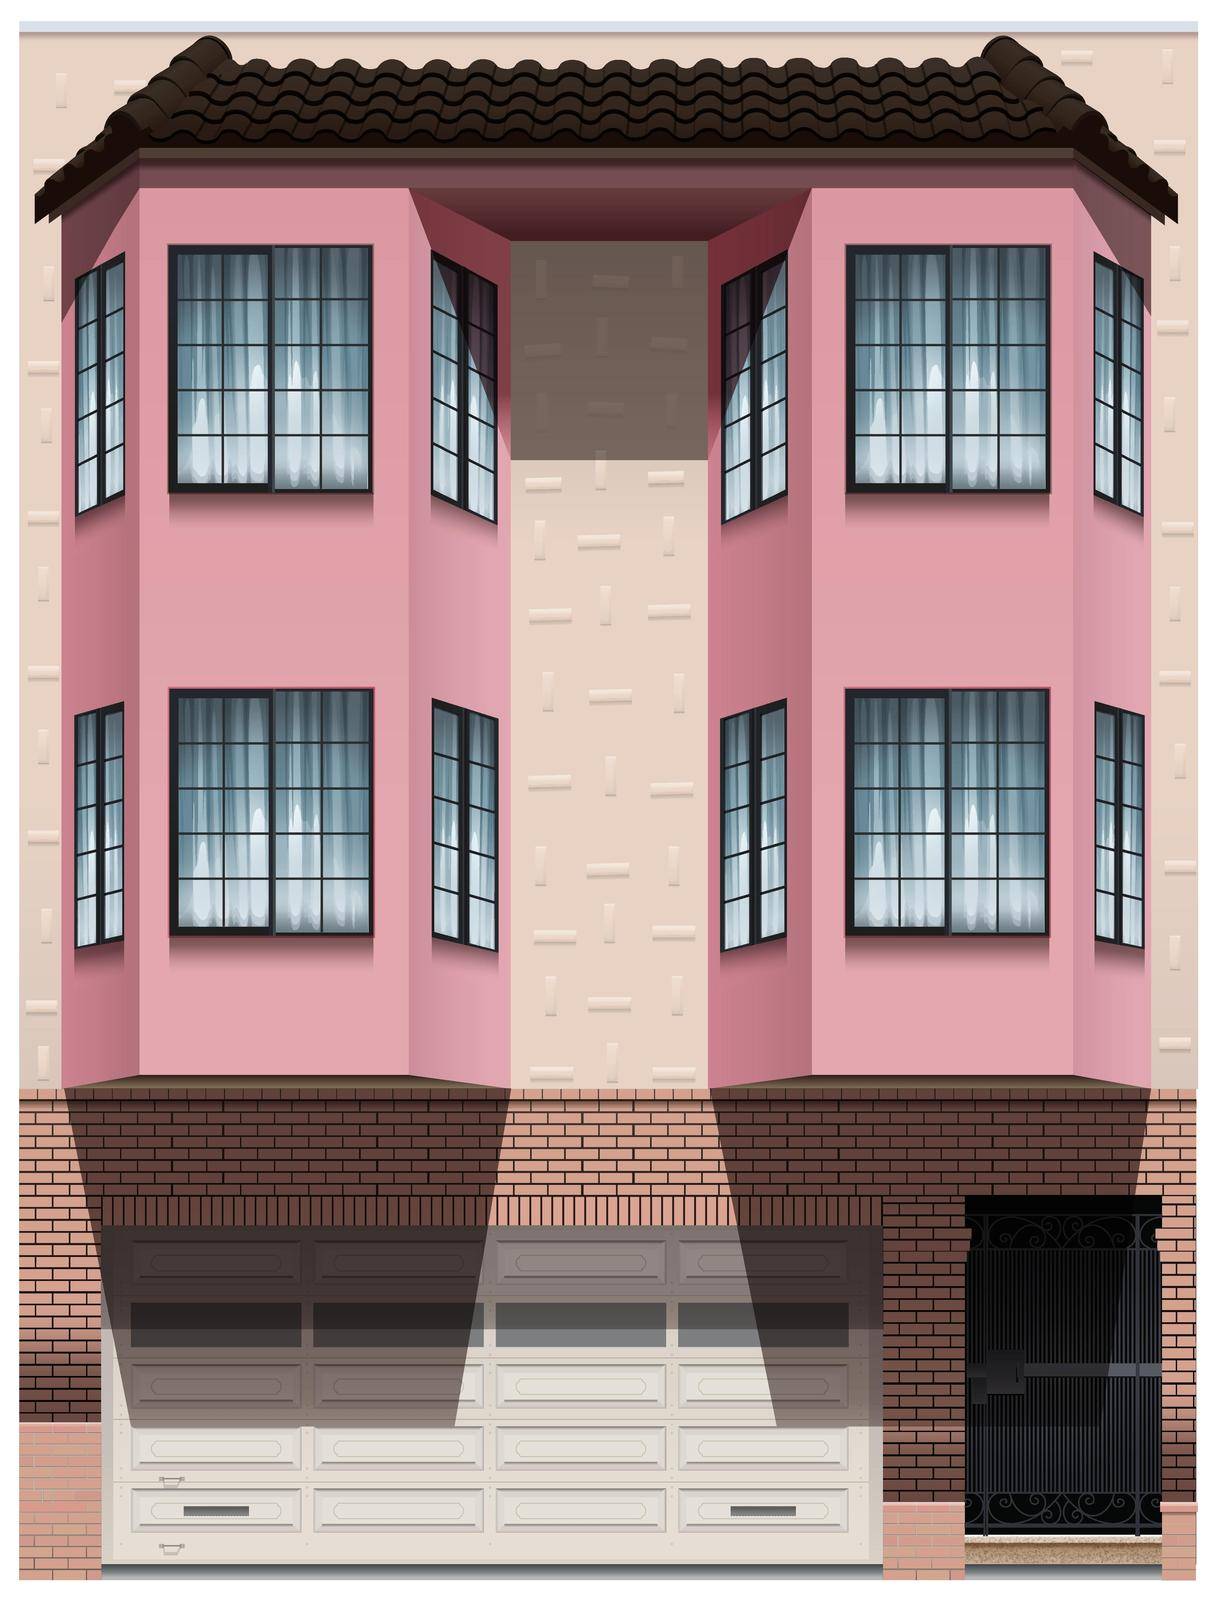 Illustration of a big pink building on a white background